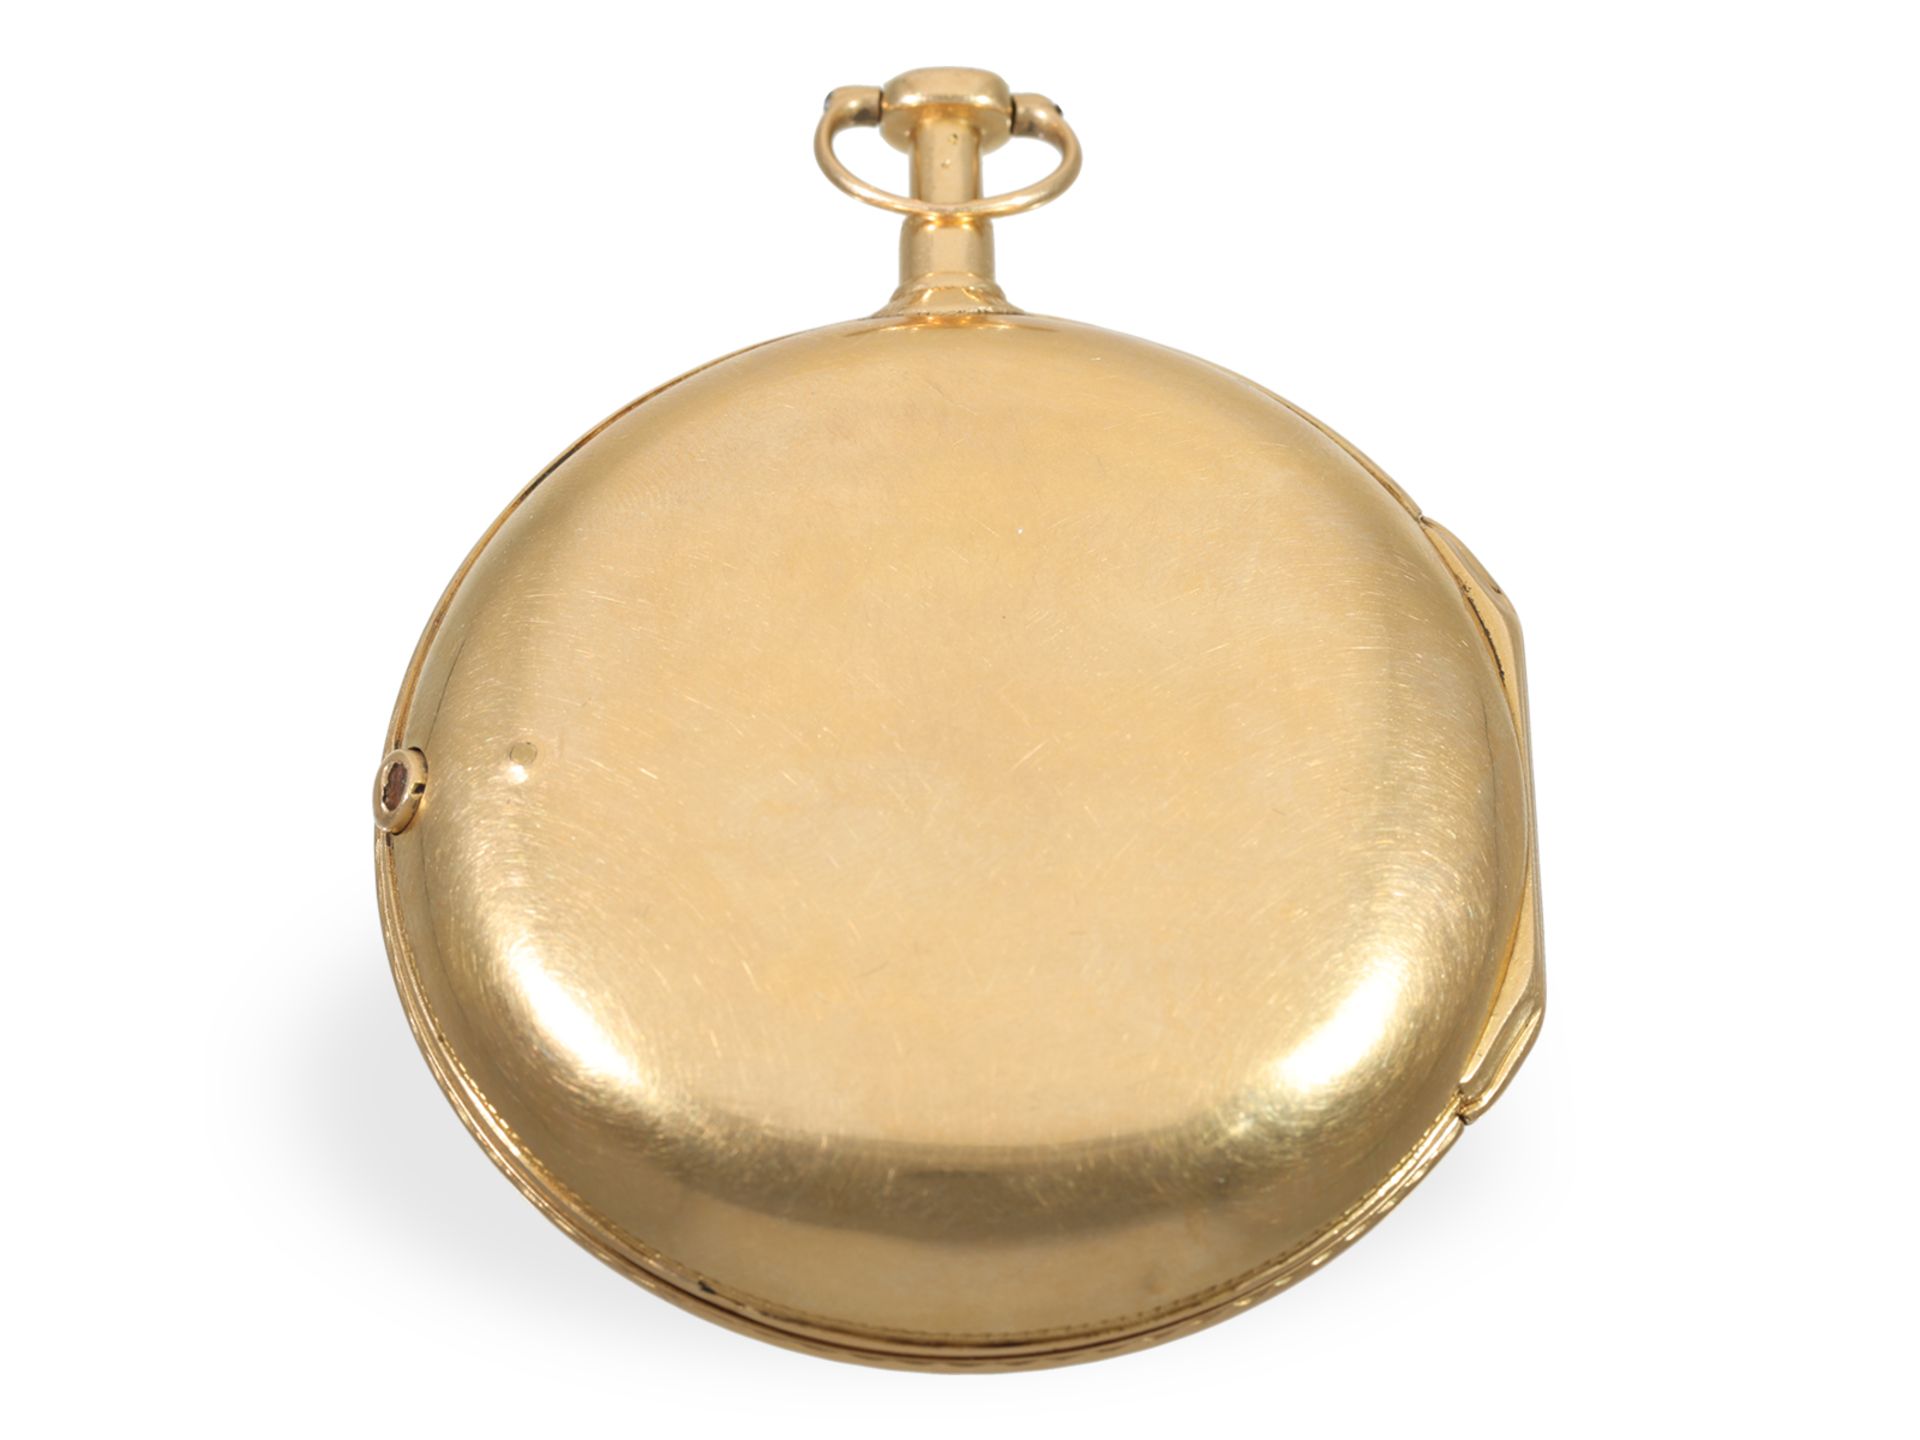 Pocket watch: absolute rarity, Pouzait with jumping seconds and calendar, signed Pouzait, ca. 1790 - Image 4 of 4